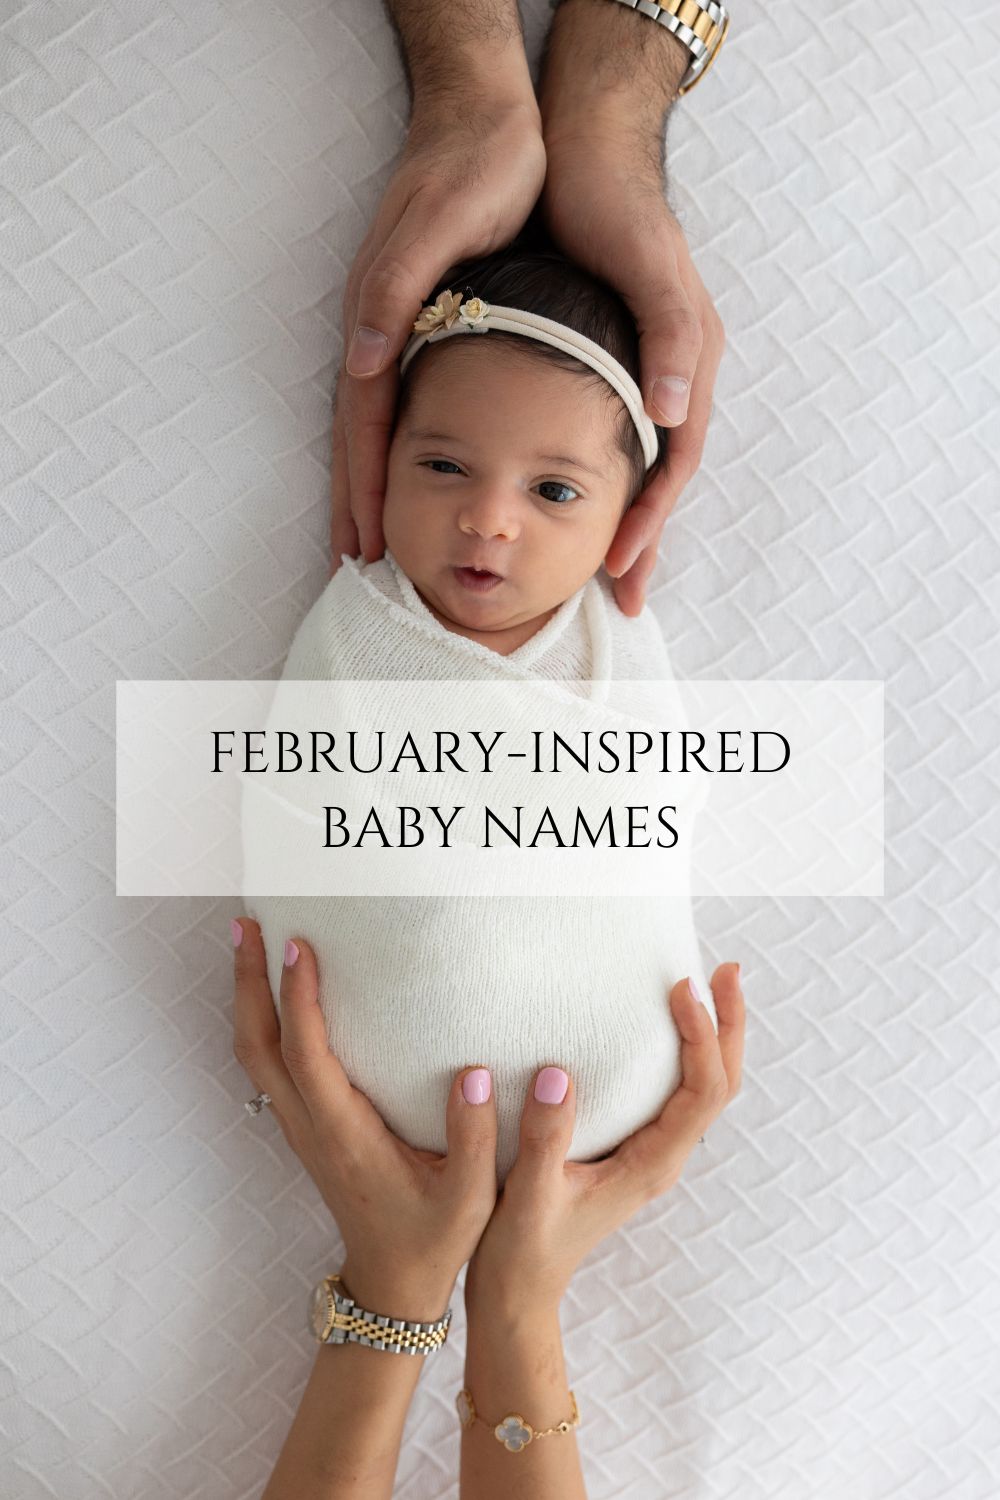 baby wrapped in a white swaddle and parents' hands are holding her. Title written on the image: february-inspired baby names